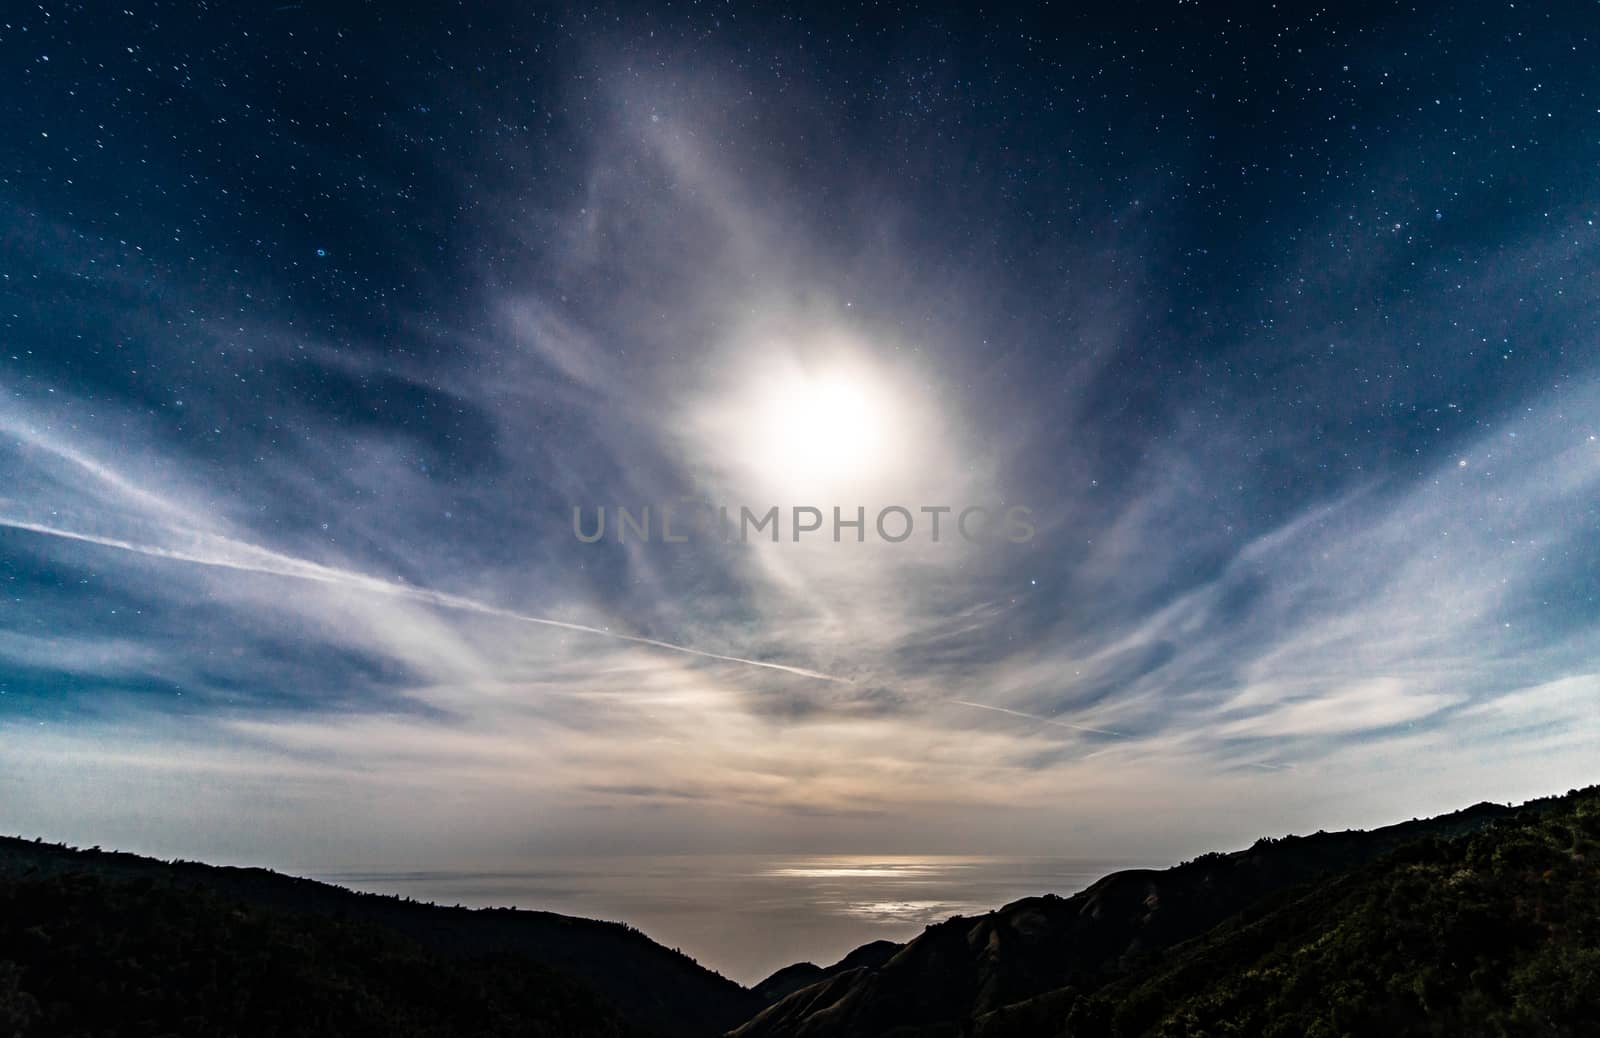 Moonlit California starry night sky over the ocean with full moon behind clouds by Pendleton